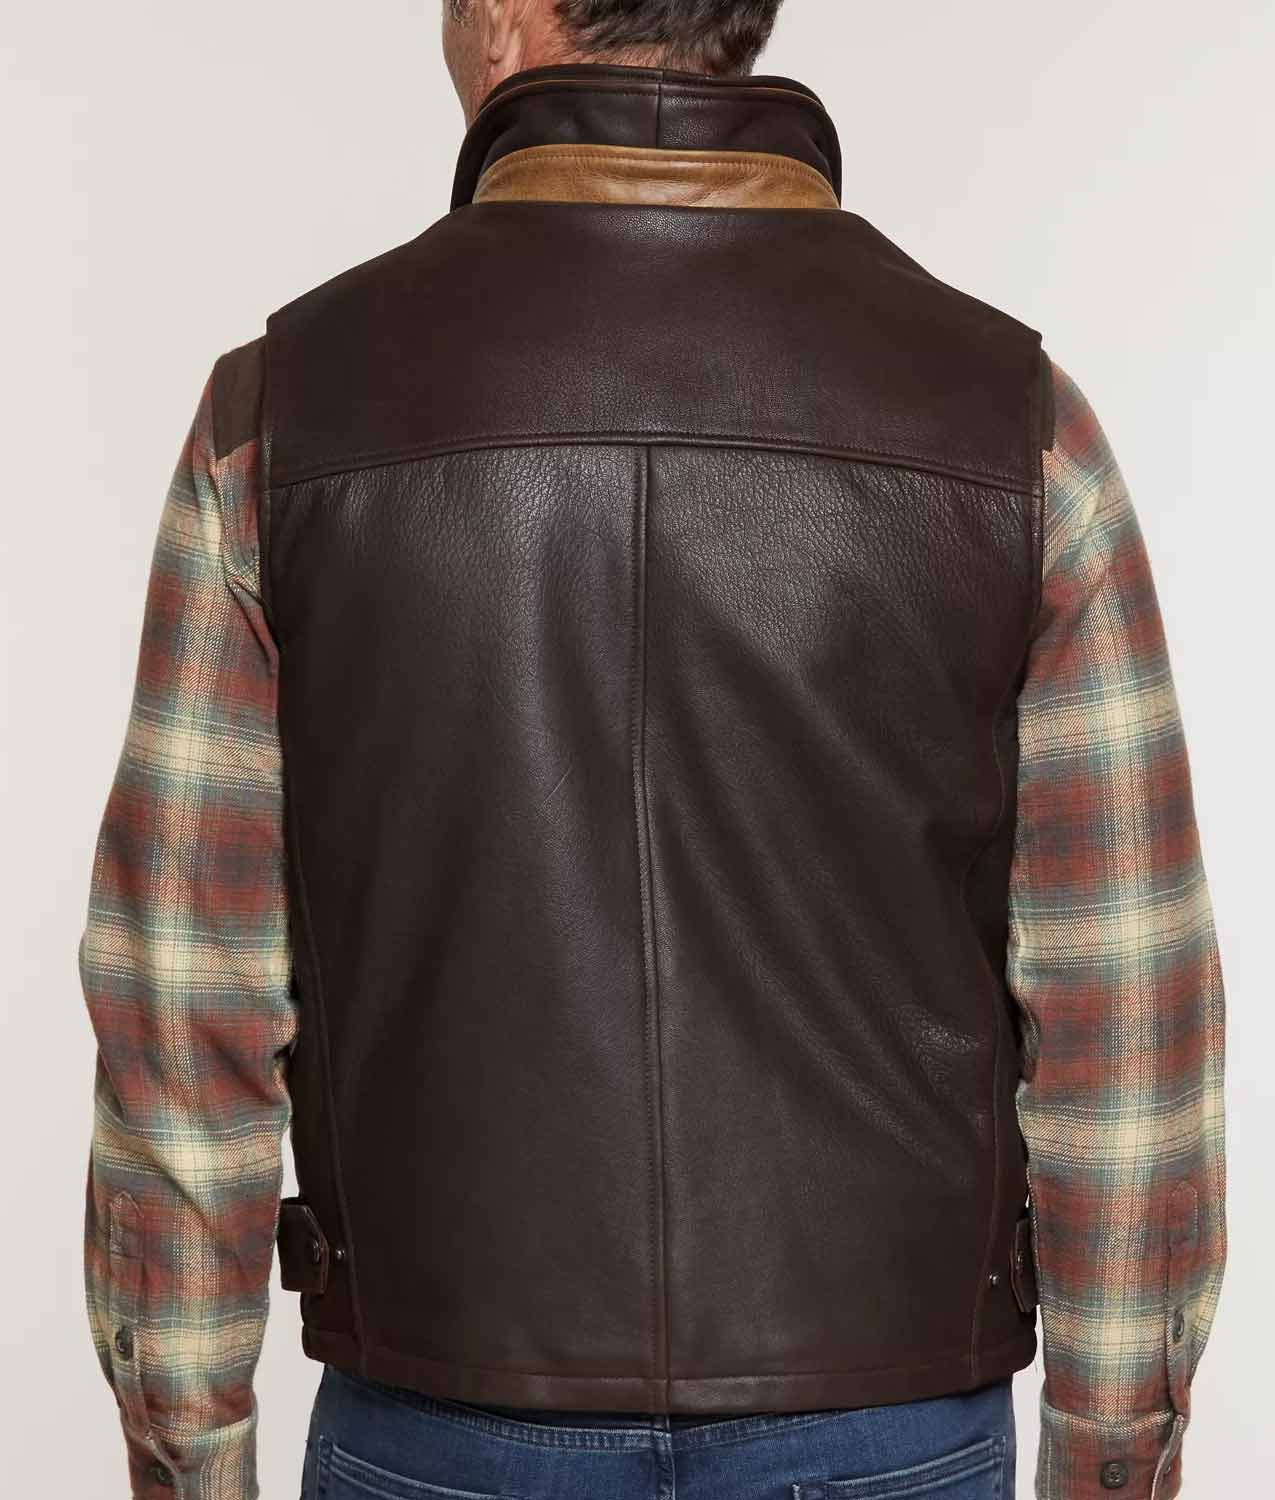 Buy Best Looking Mens Dark Brown Leather Vest Removable Shearling Collar